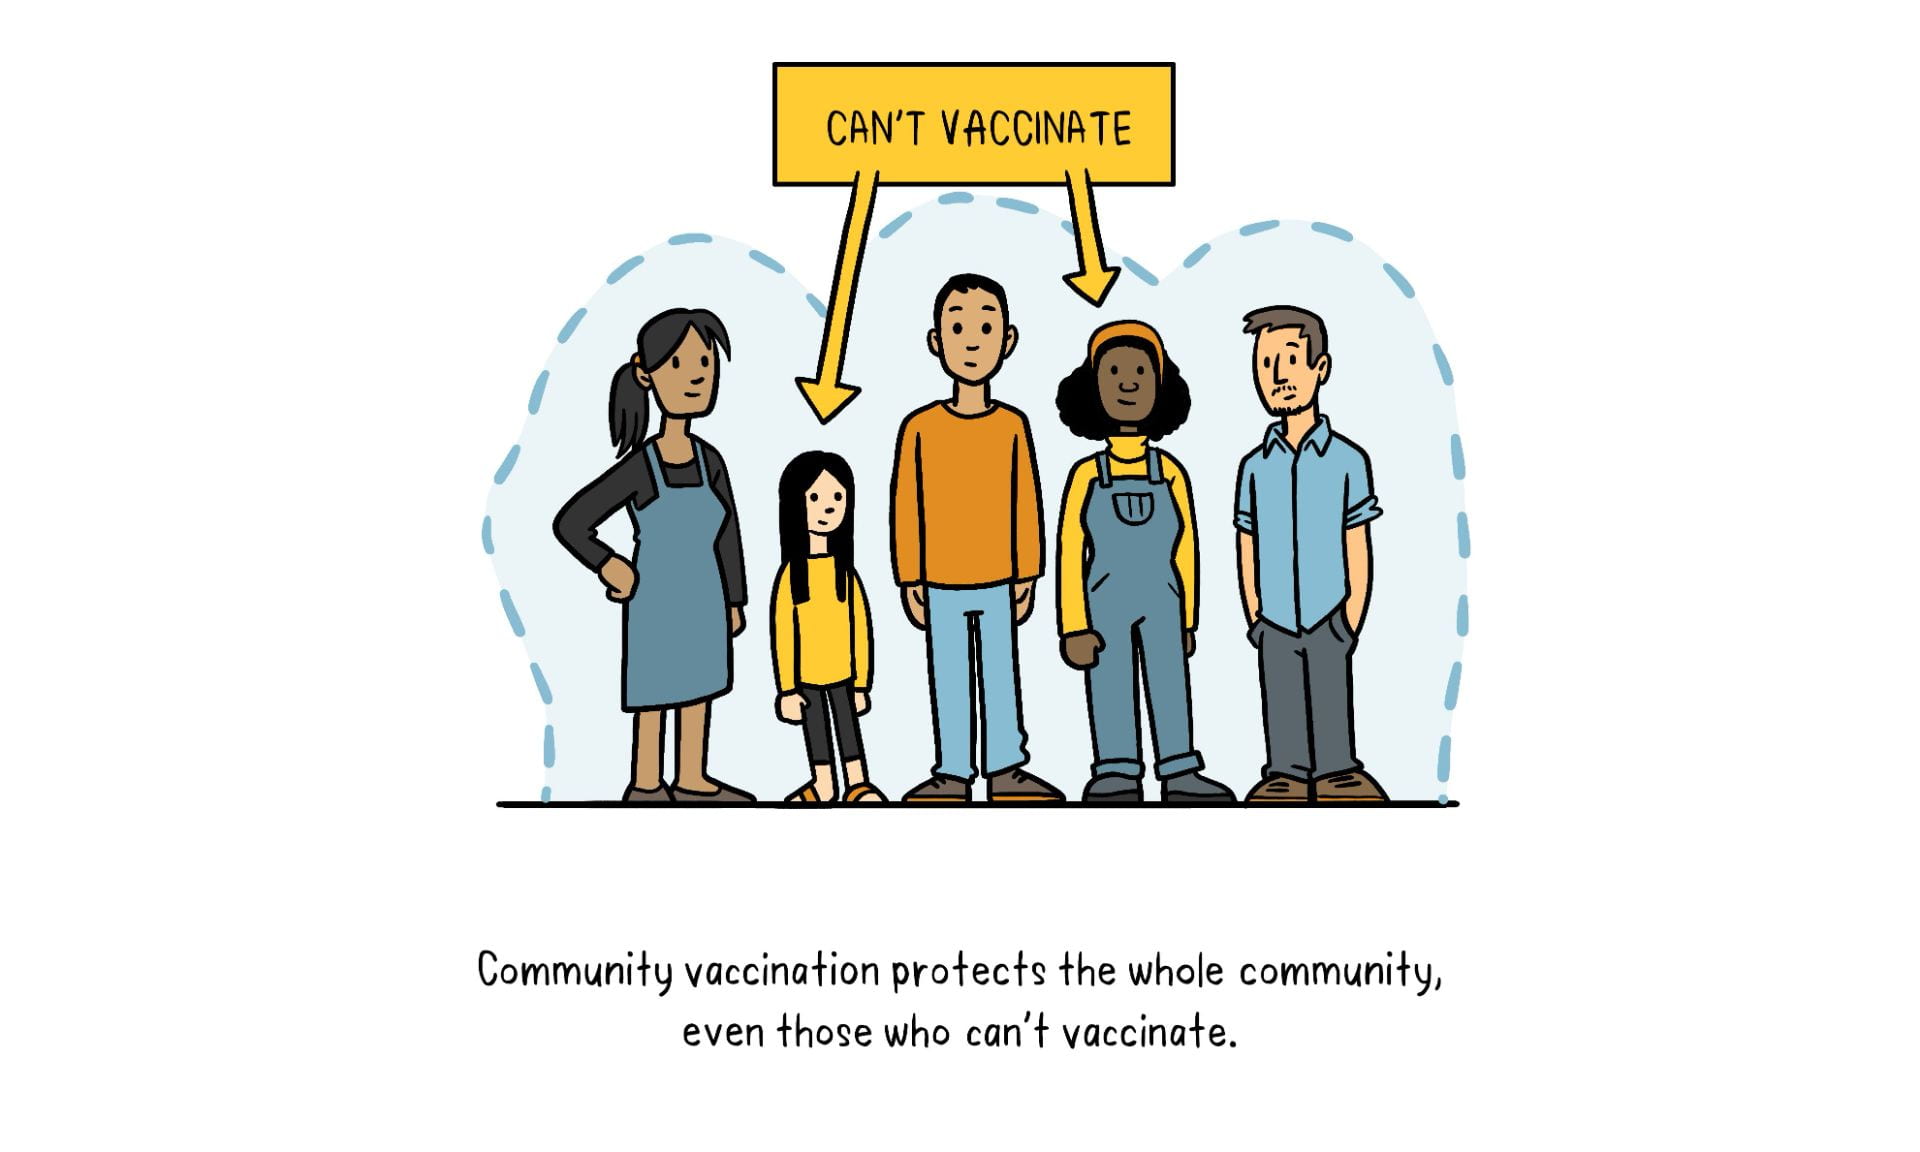 There is a group of 5 people in a horizontal line by one another and the second and fourth person have a sign over them that says “Can’t Vaccinate.”